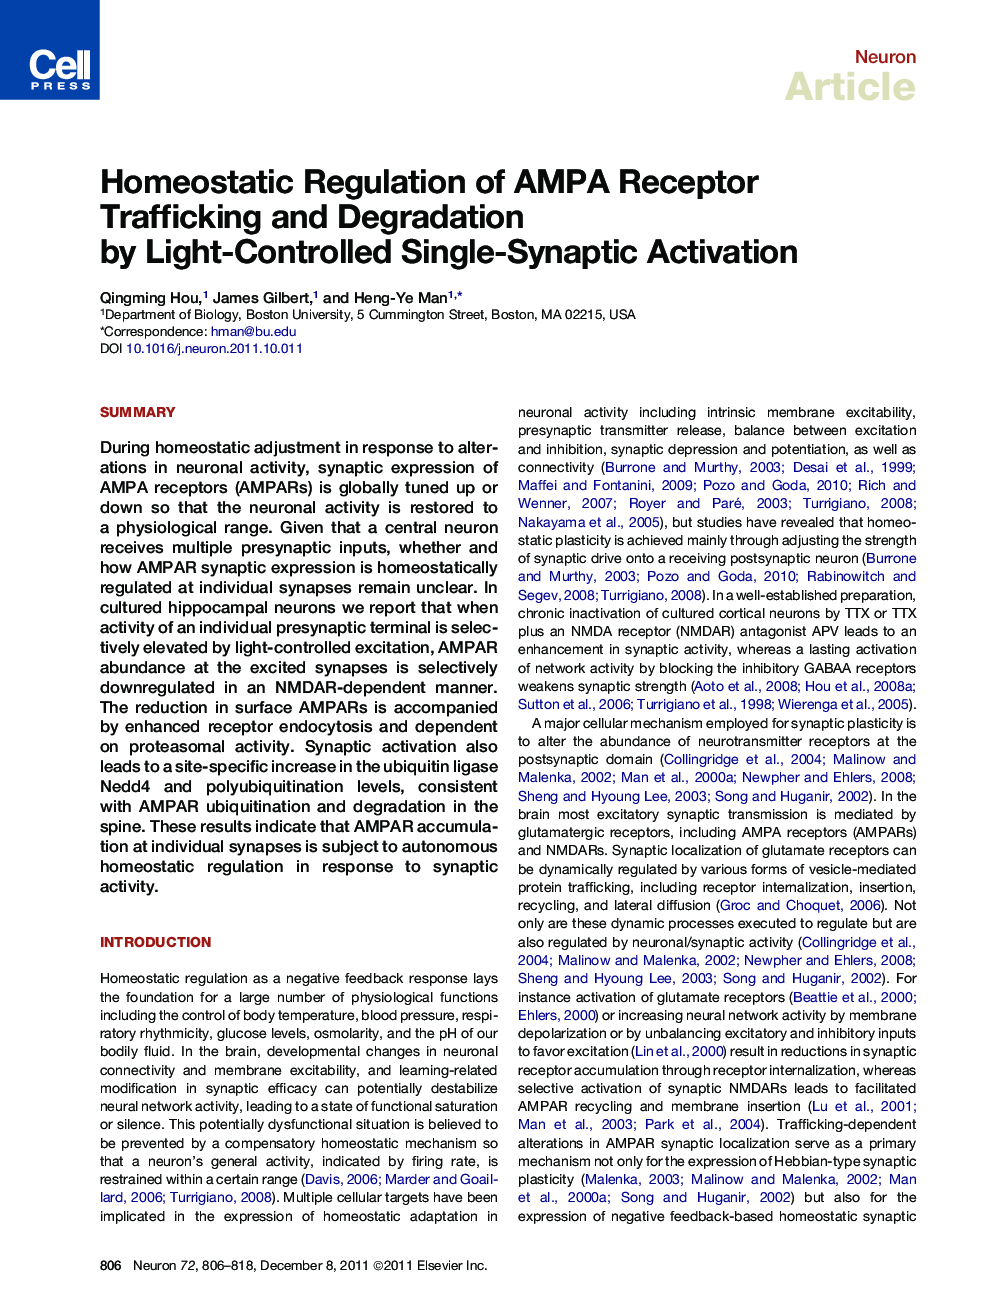 Homeostatic Regulation of AMPA Receptor Trafficking and Degradation by Light-Controlled Single-Synaptic Activation